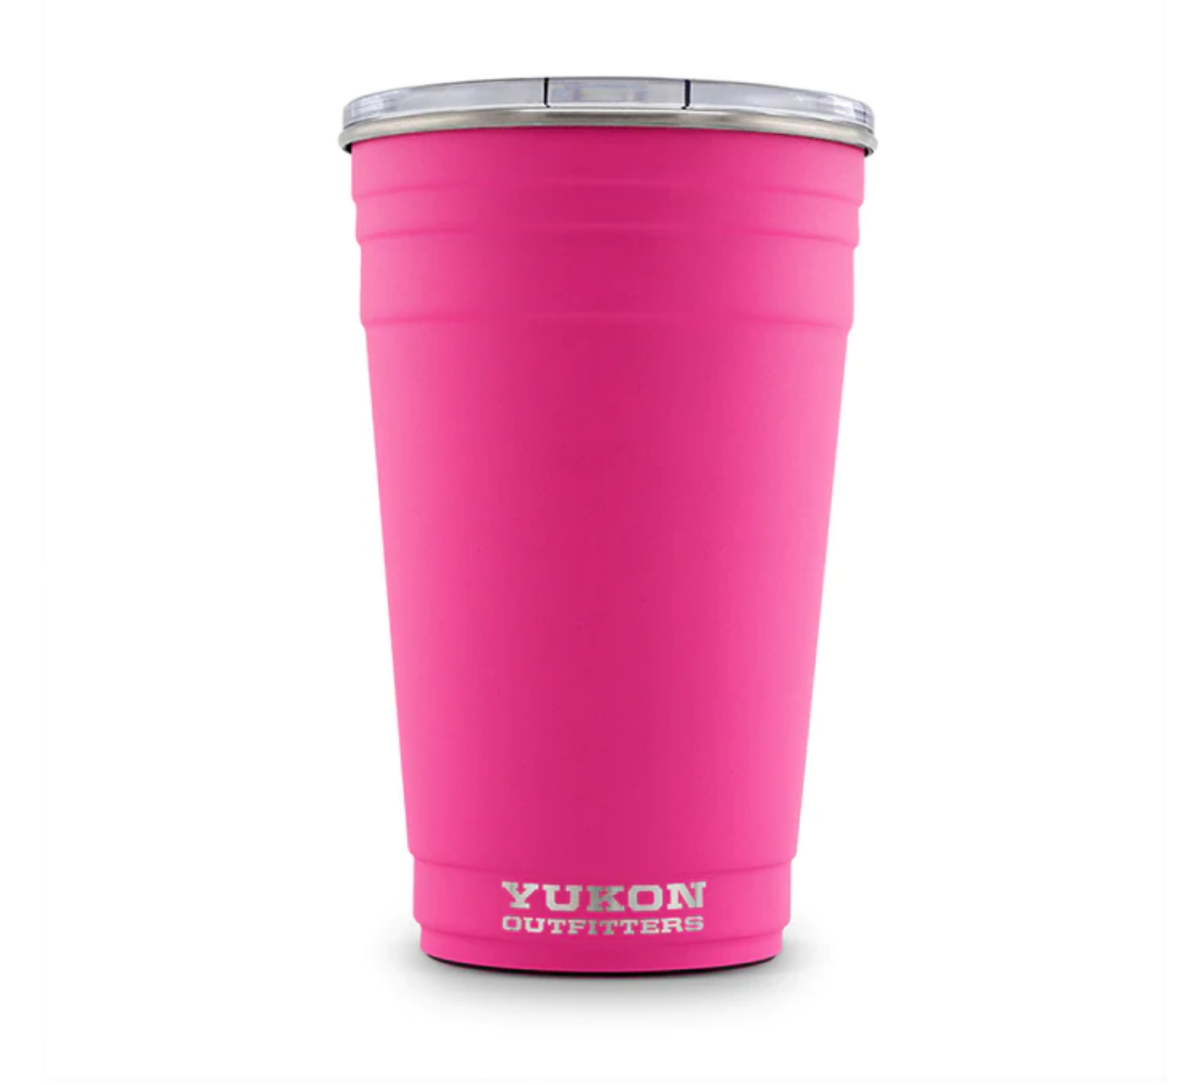 Yukon Outfitters 20oz Fiesta Cup – Shocking Pink